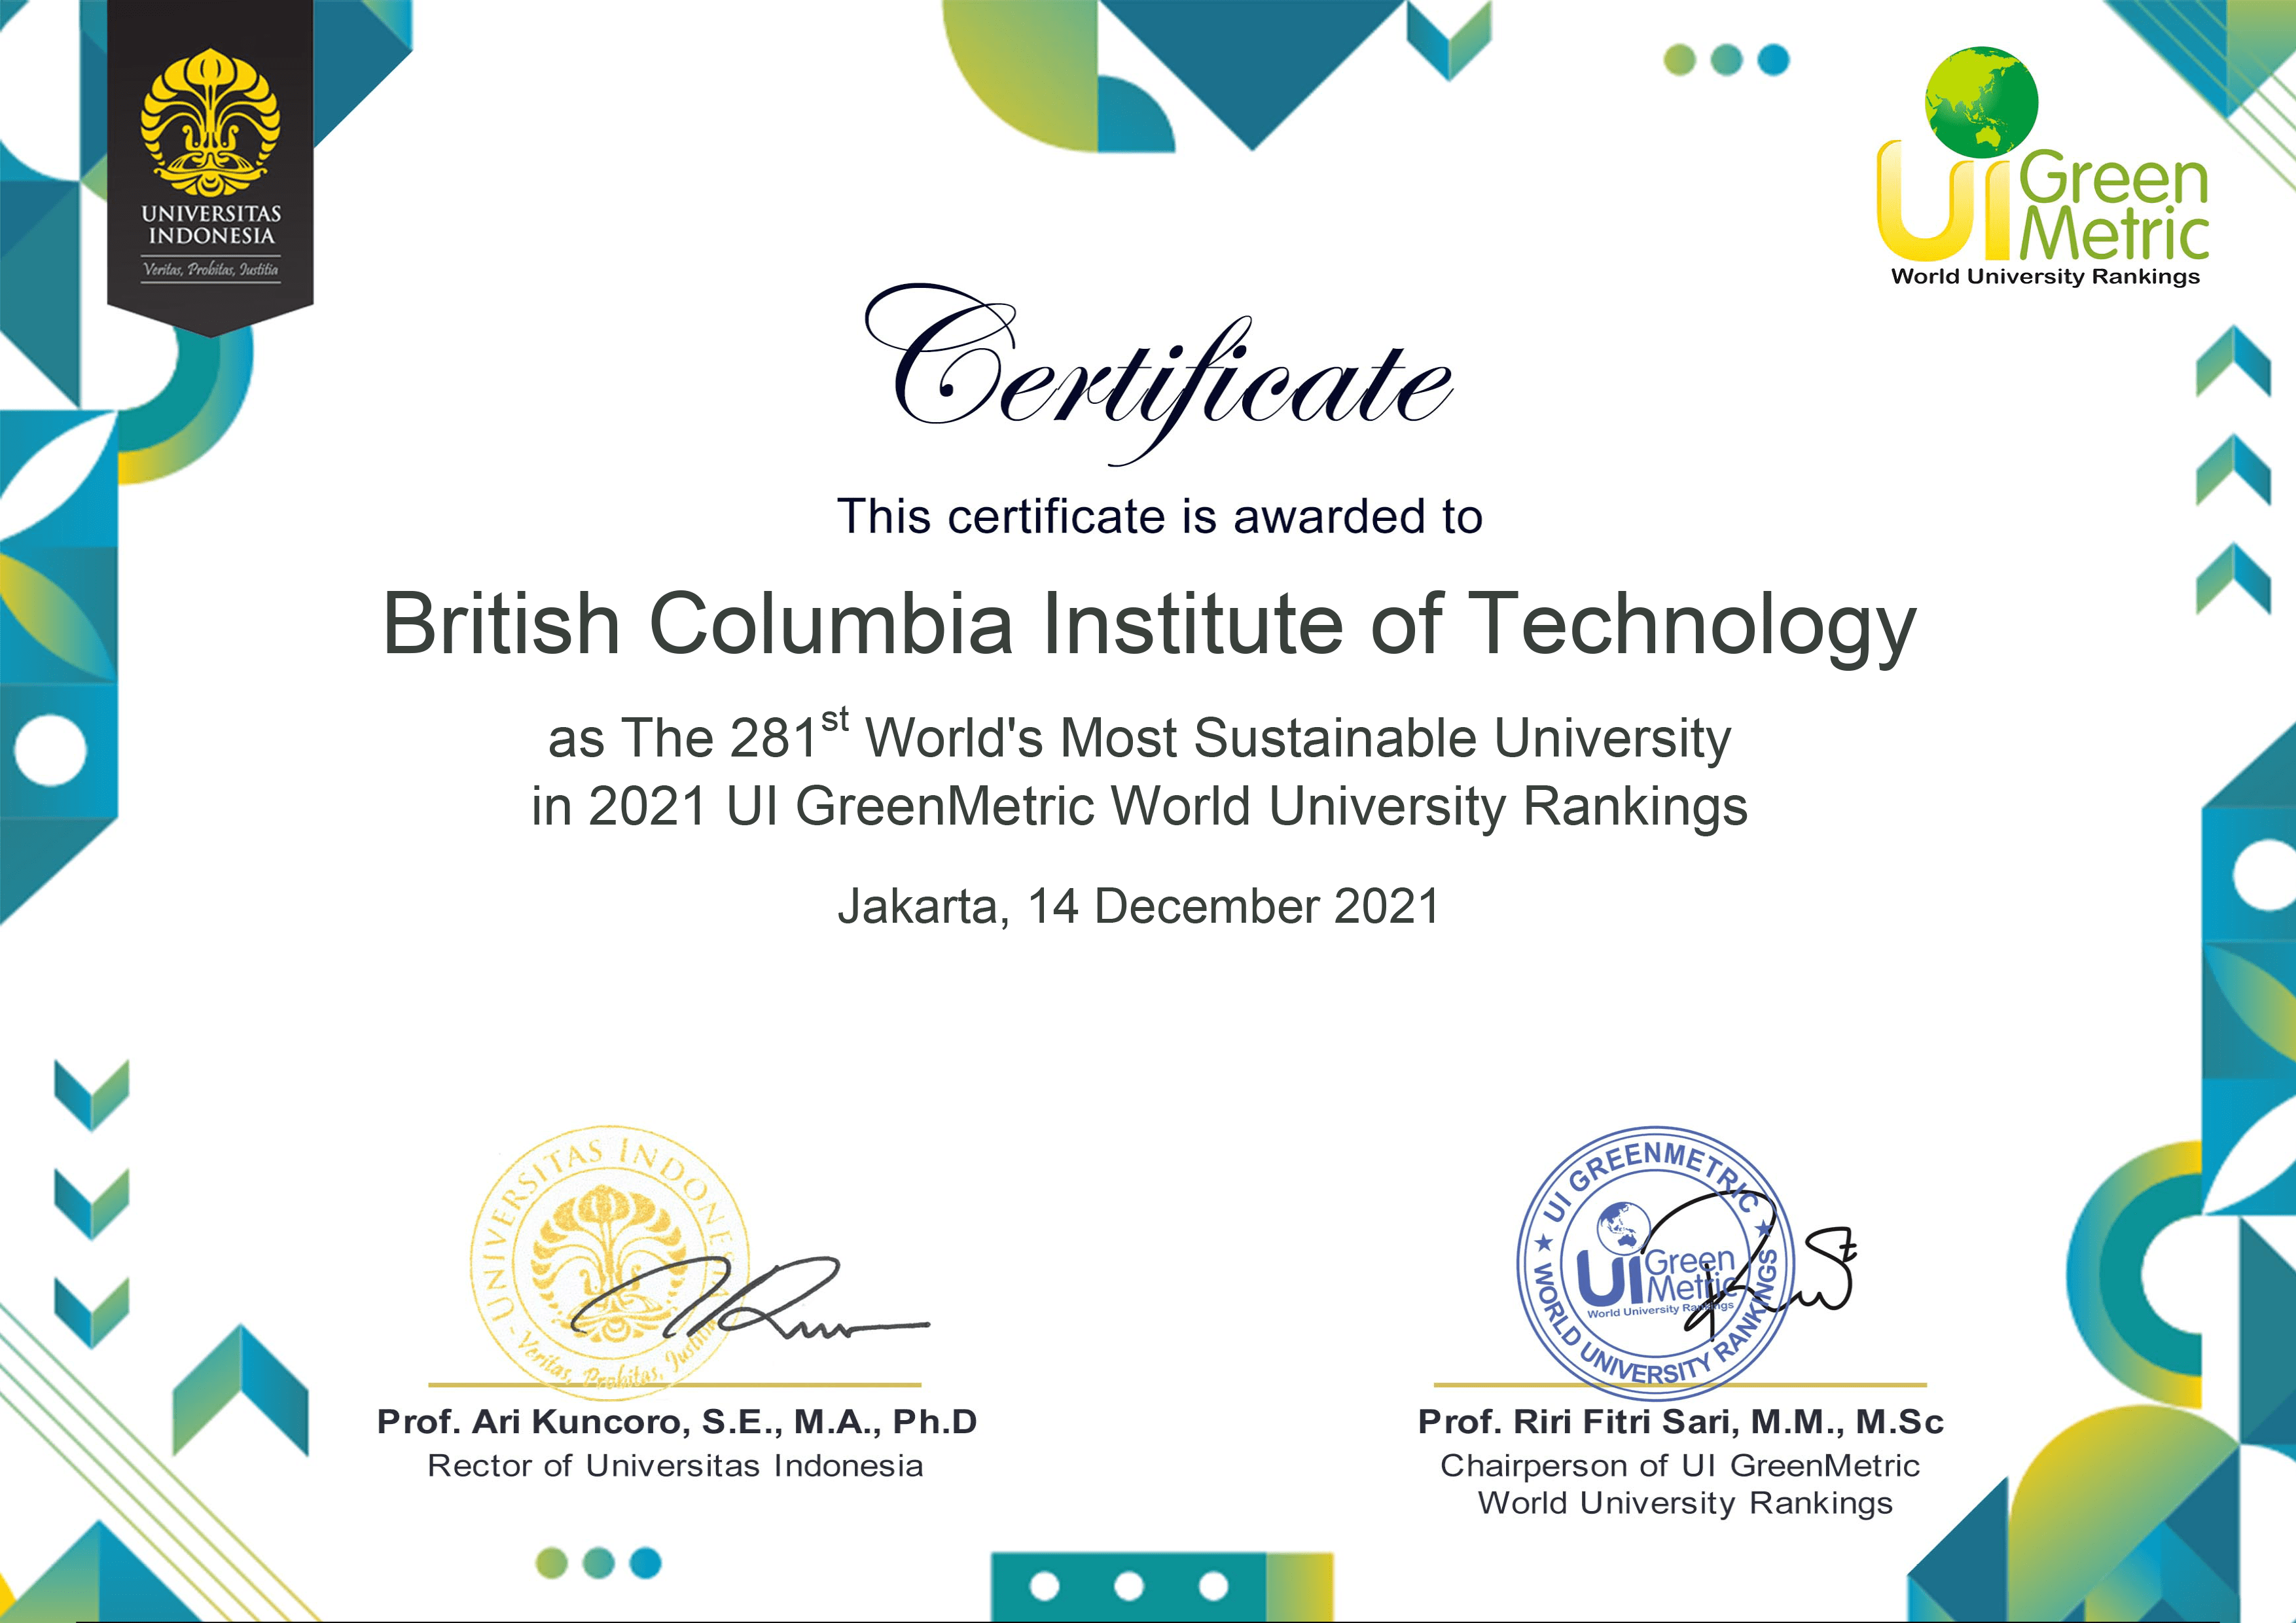 Certificate awarded to BCIT for the 2021 UI GreenMetric World University Rankings.